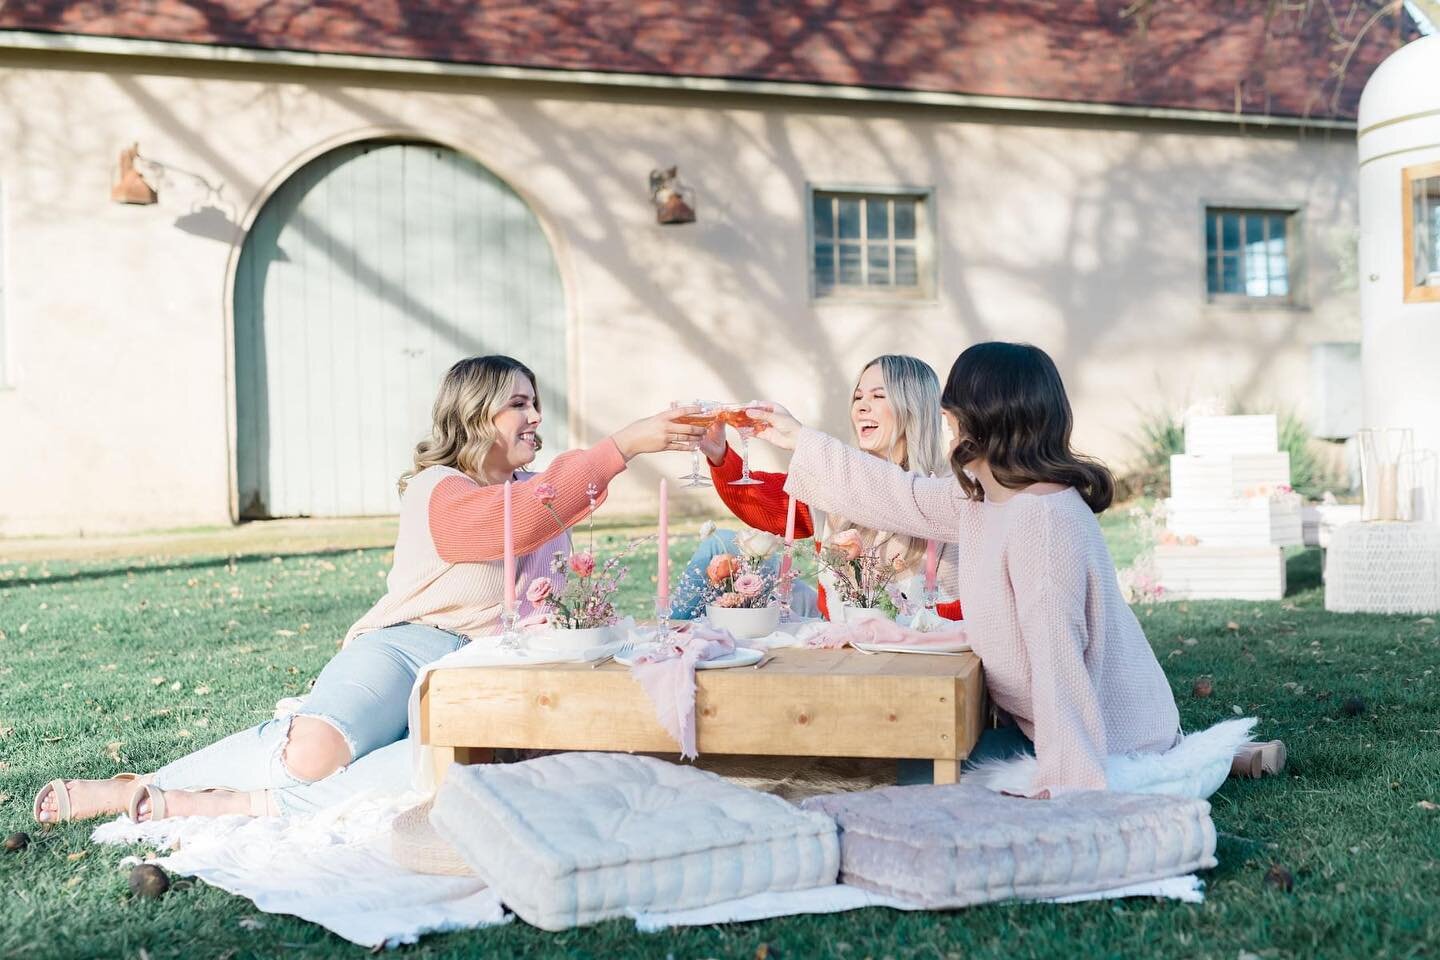 It's a picnic with the girls kind of weekend 🥂 #TheMaples 📸: @clairenicolephotography 

Planning + Design: @kloeevents
Balloons:  @hiphooraycompany
Floral Designer: @bloomonade
Mobile Bar: belleaventureevents
Furniture Rentals + Backdrop: @petiteev